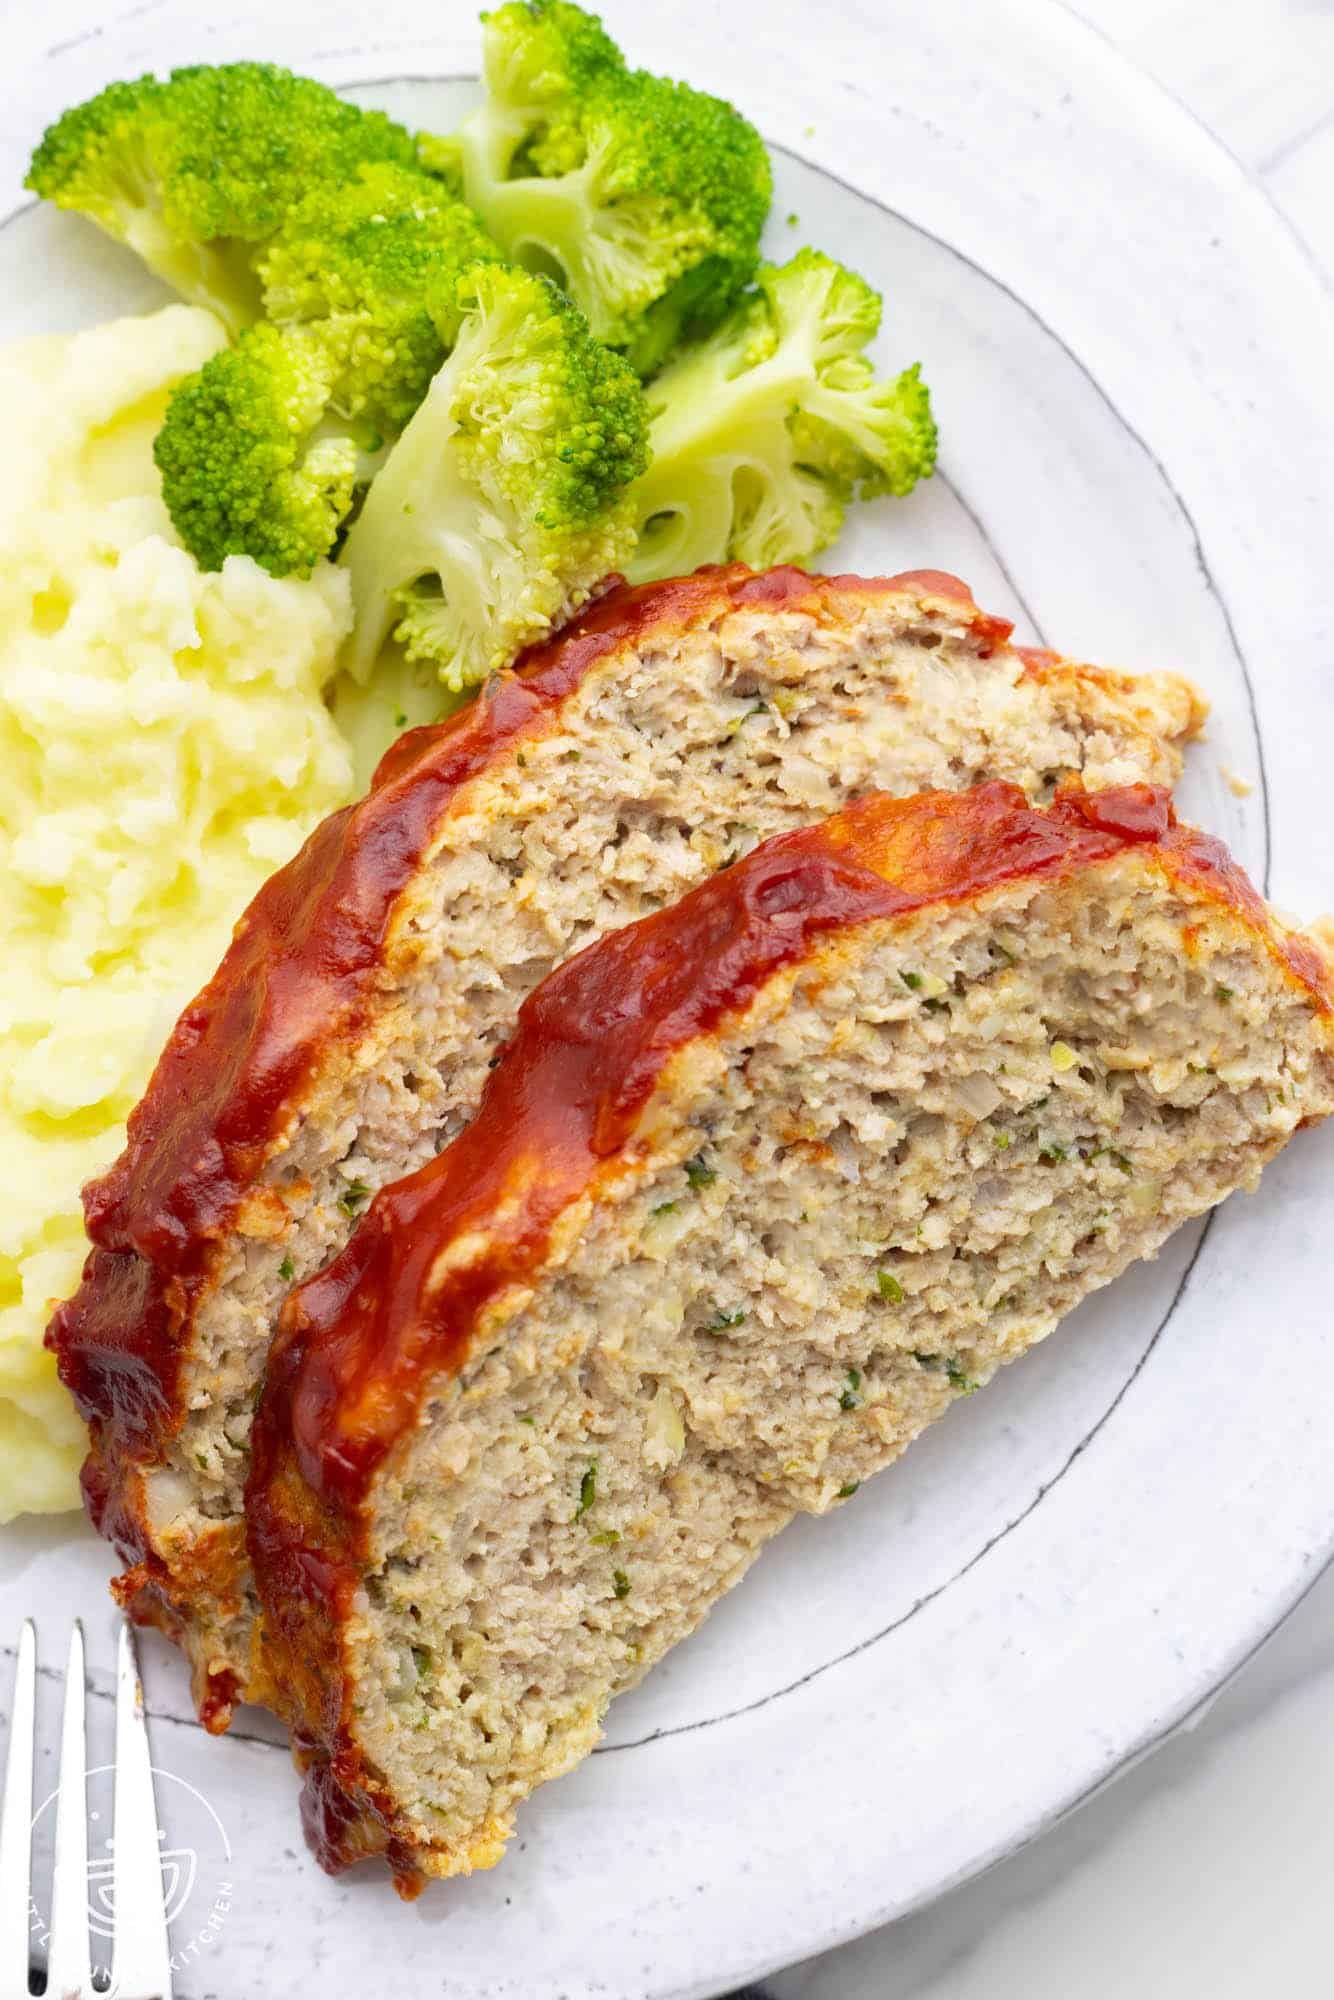 a dinner plate of two slices of chicken meatloaf with potatoes and broccoli.